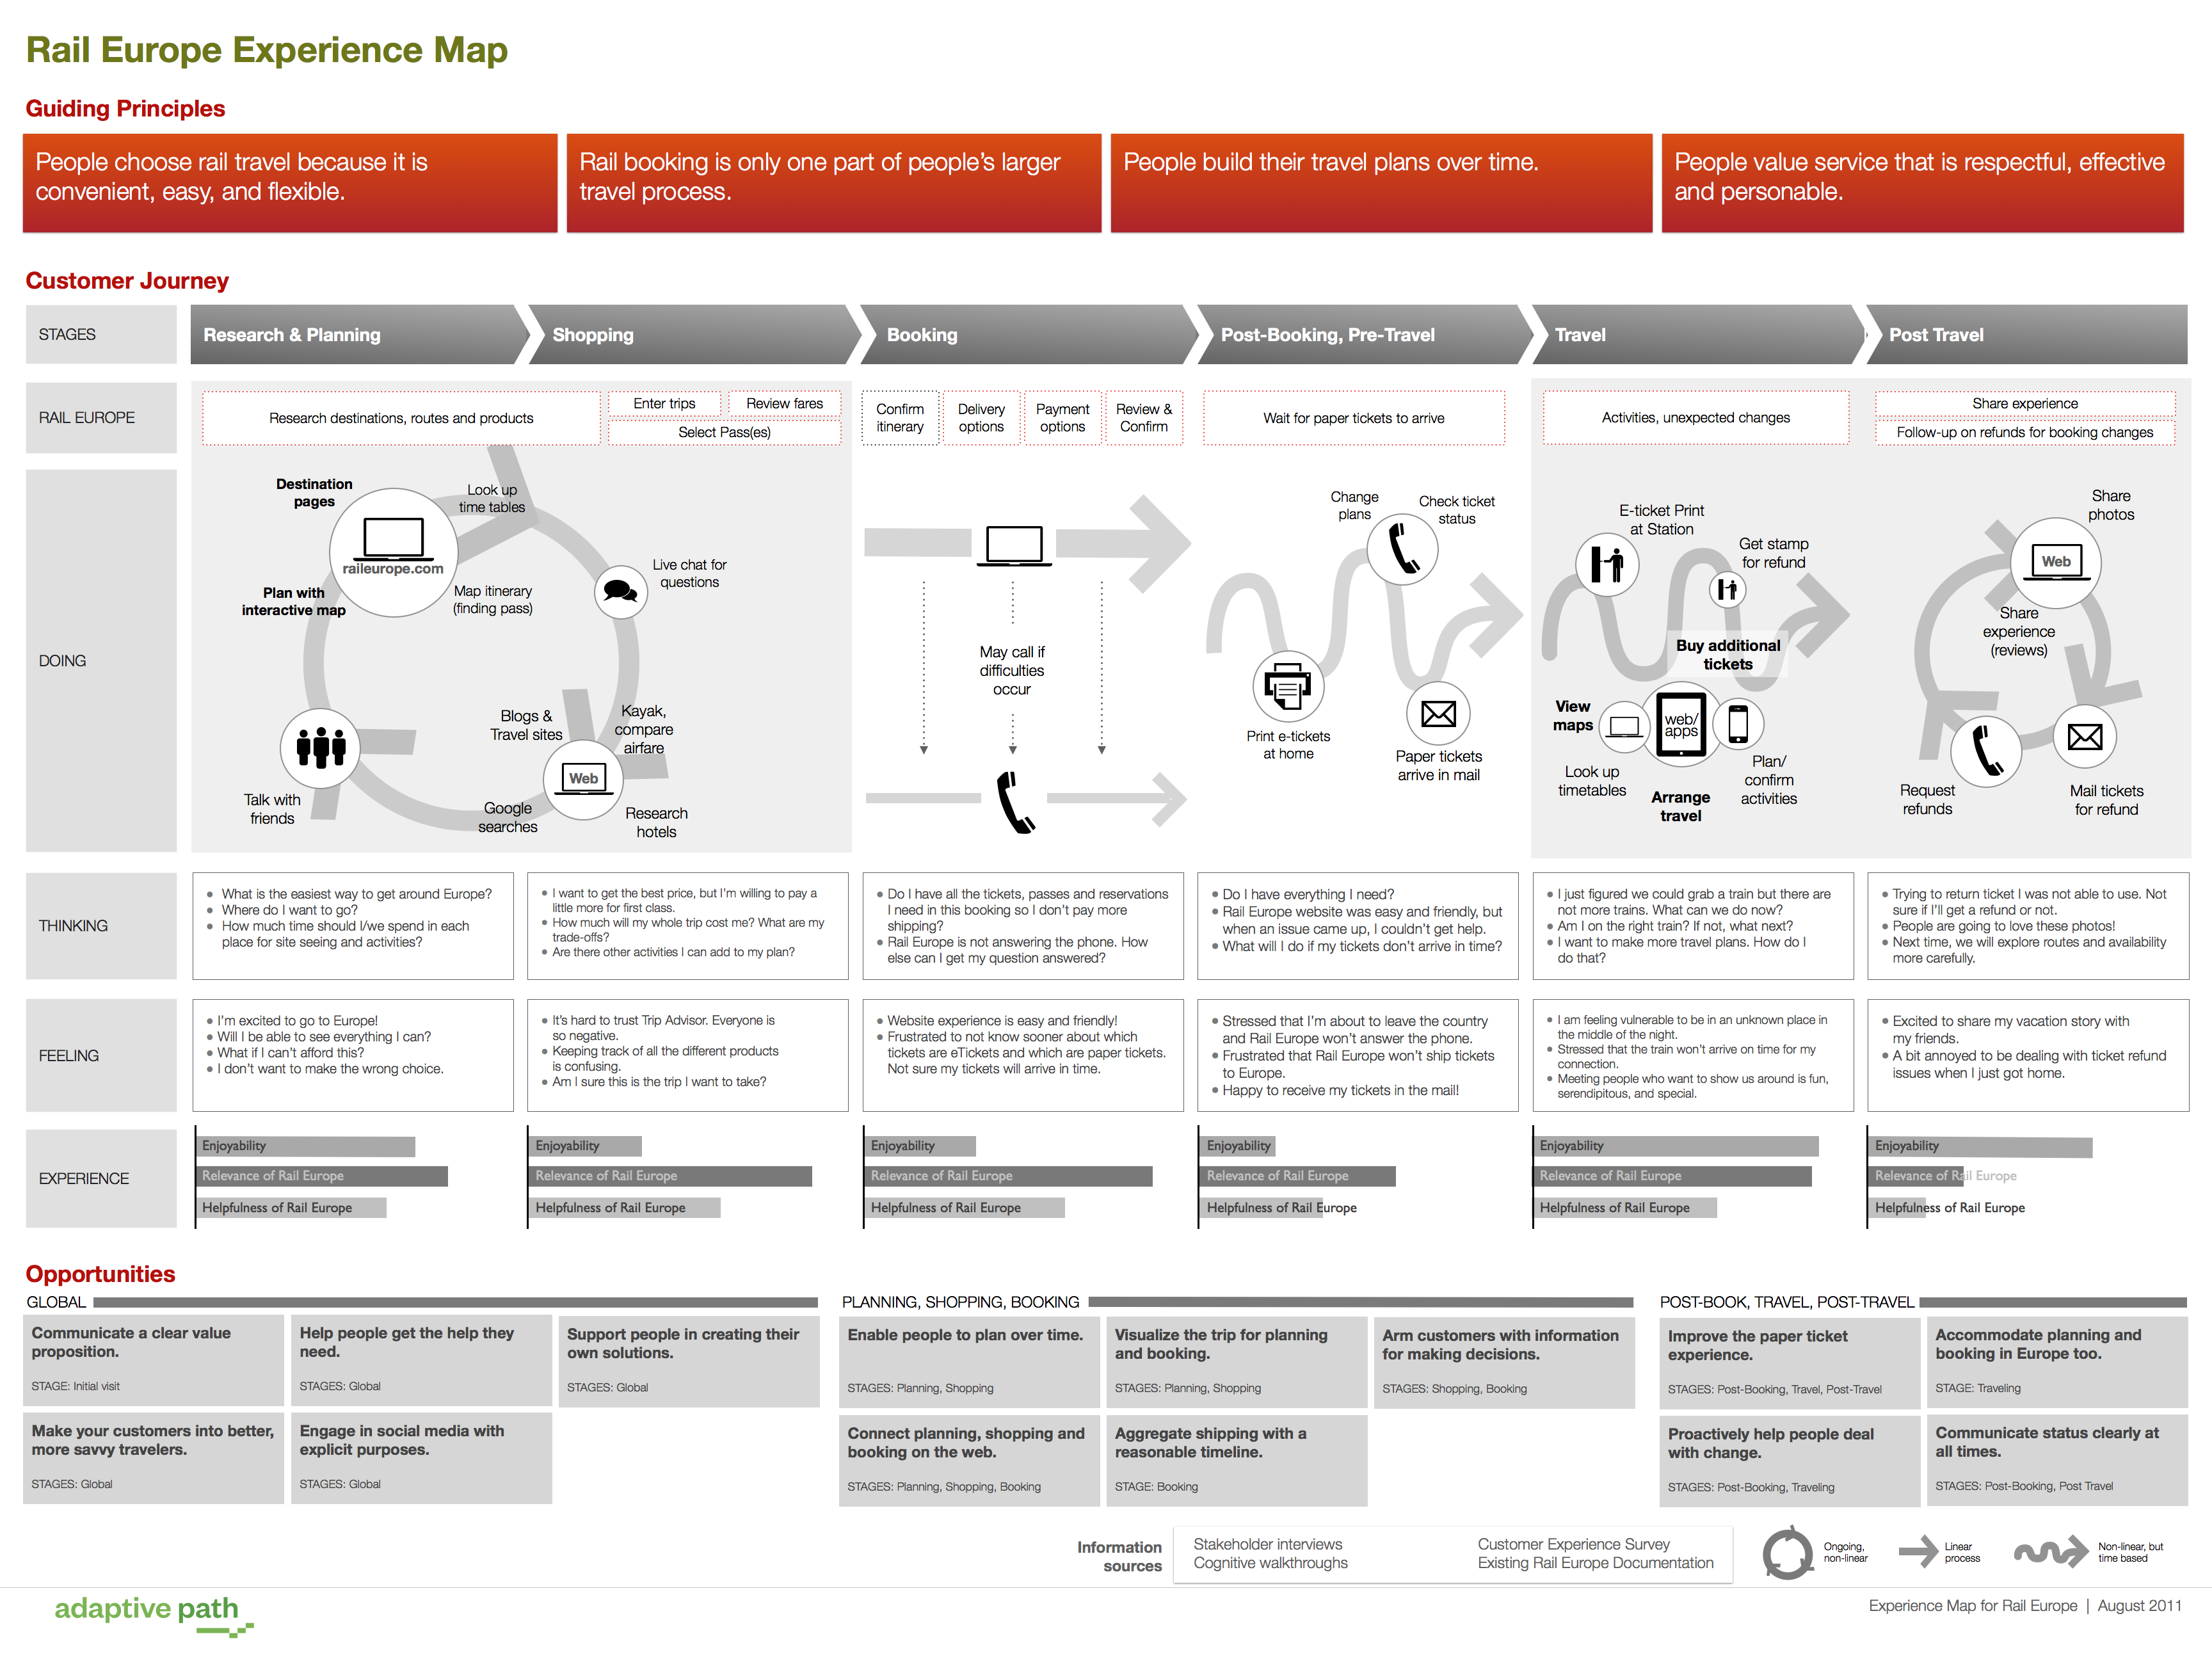 customer journey mapping 